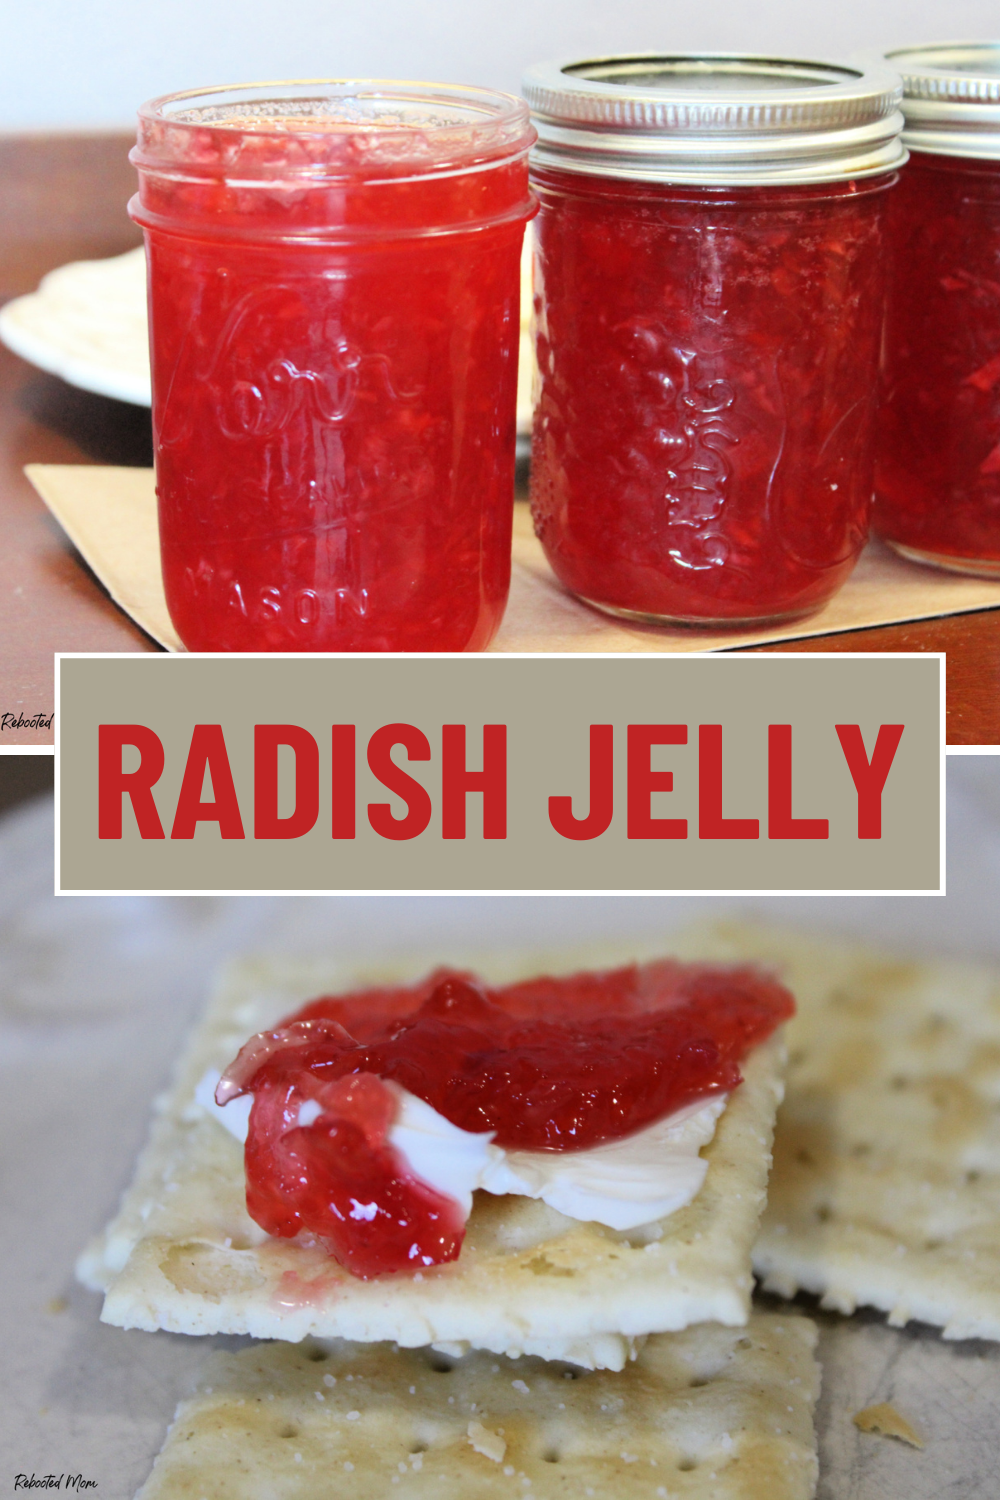 A very unusual twist on traditional jellies, this radish jelly combines finely chopped radishes with prepared horseradish for a jelly that's great on cream cheese or meat.